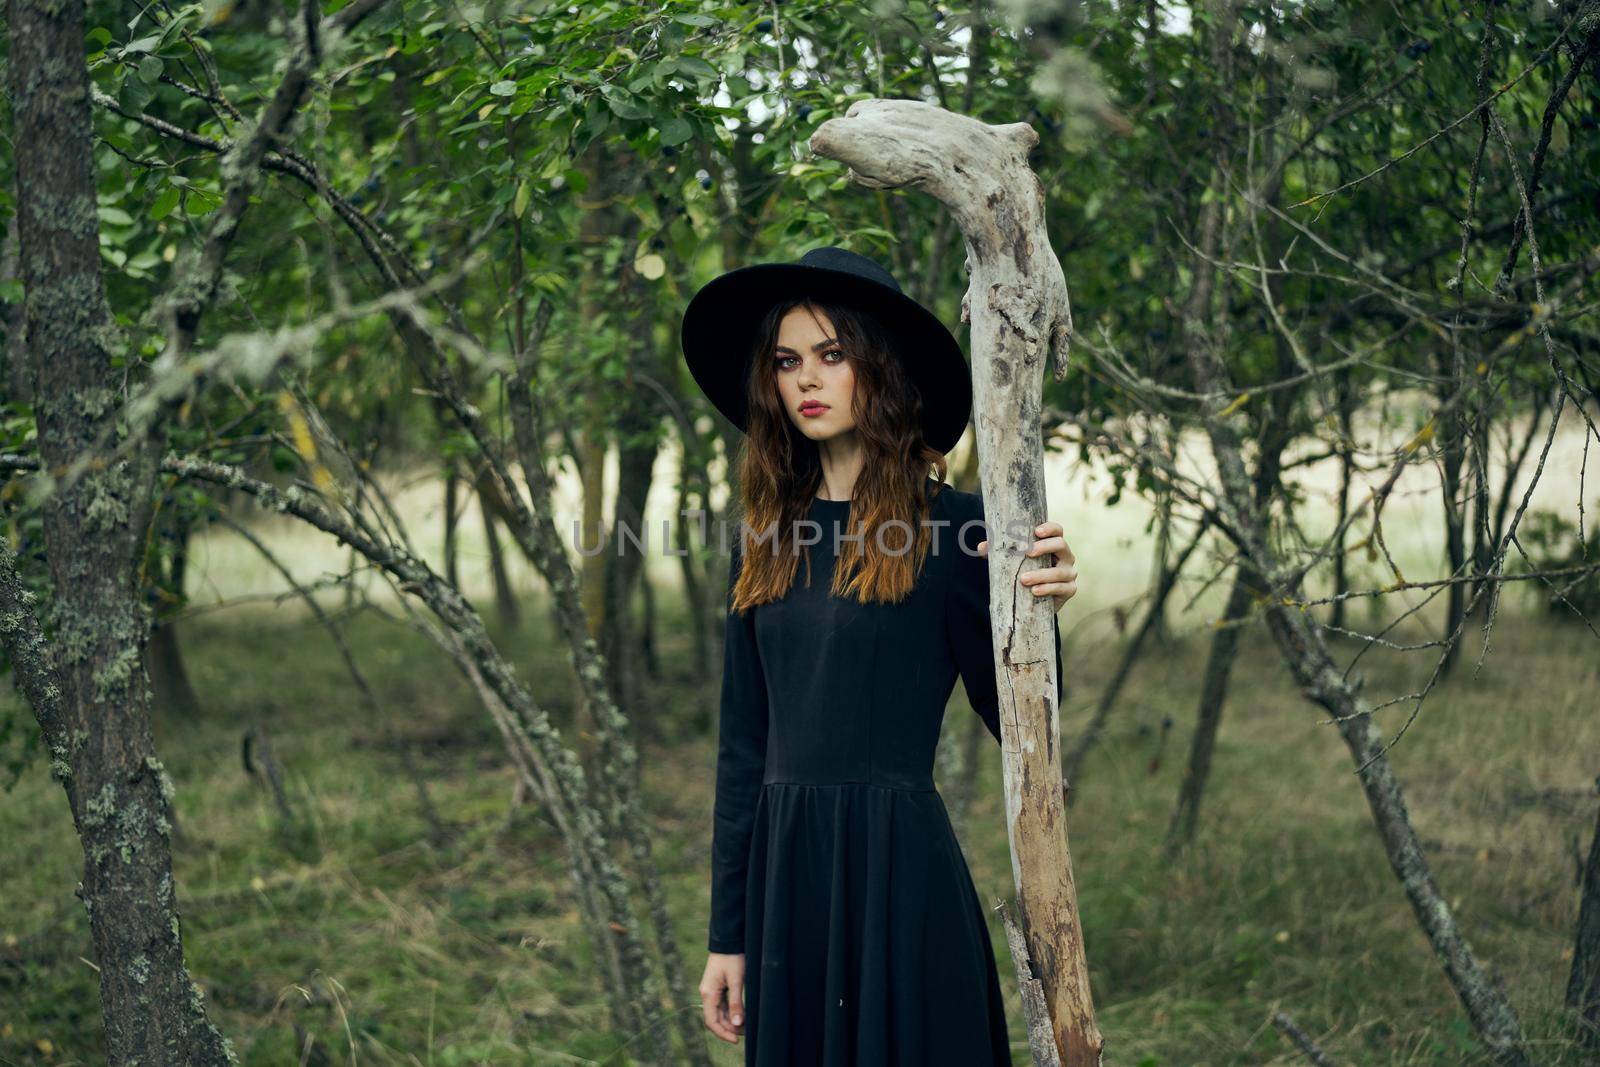 woman in witch costume in forest posing staff logic. High quality photo